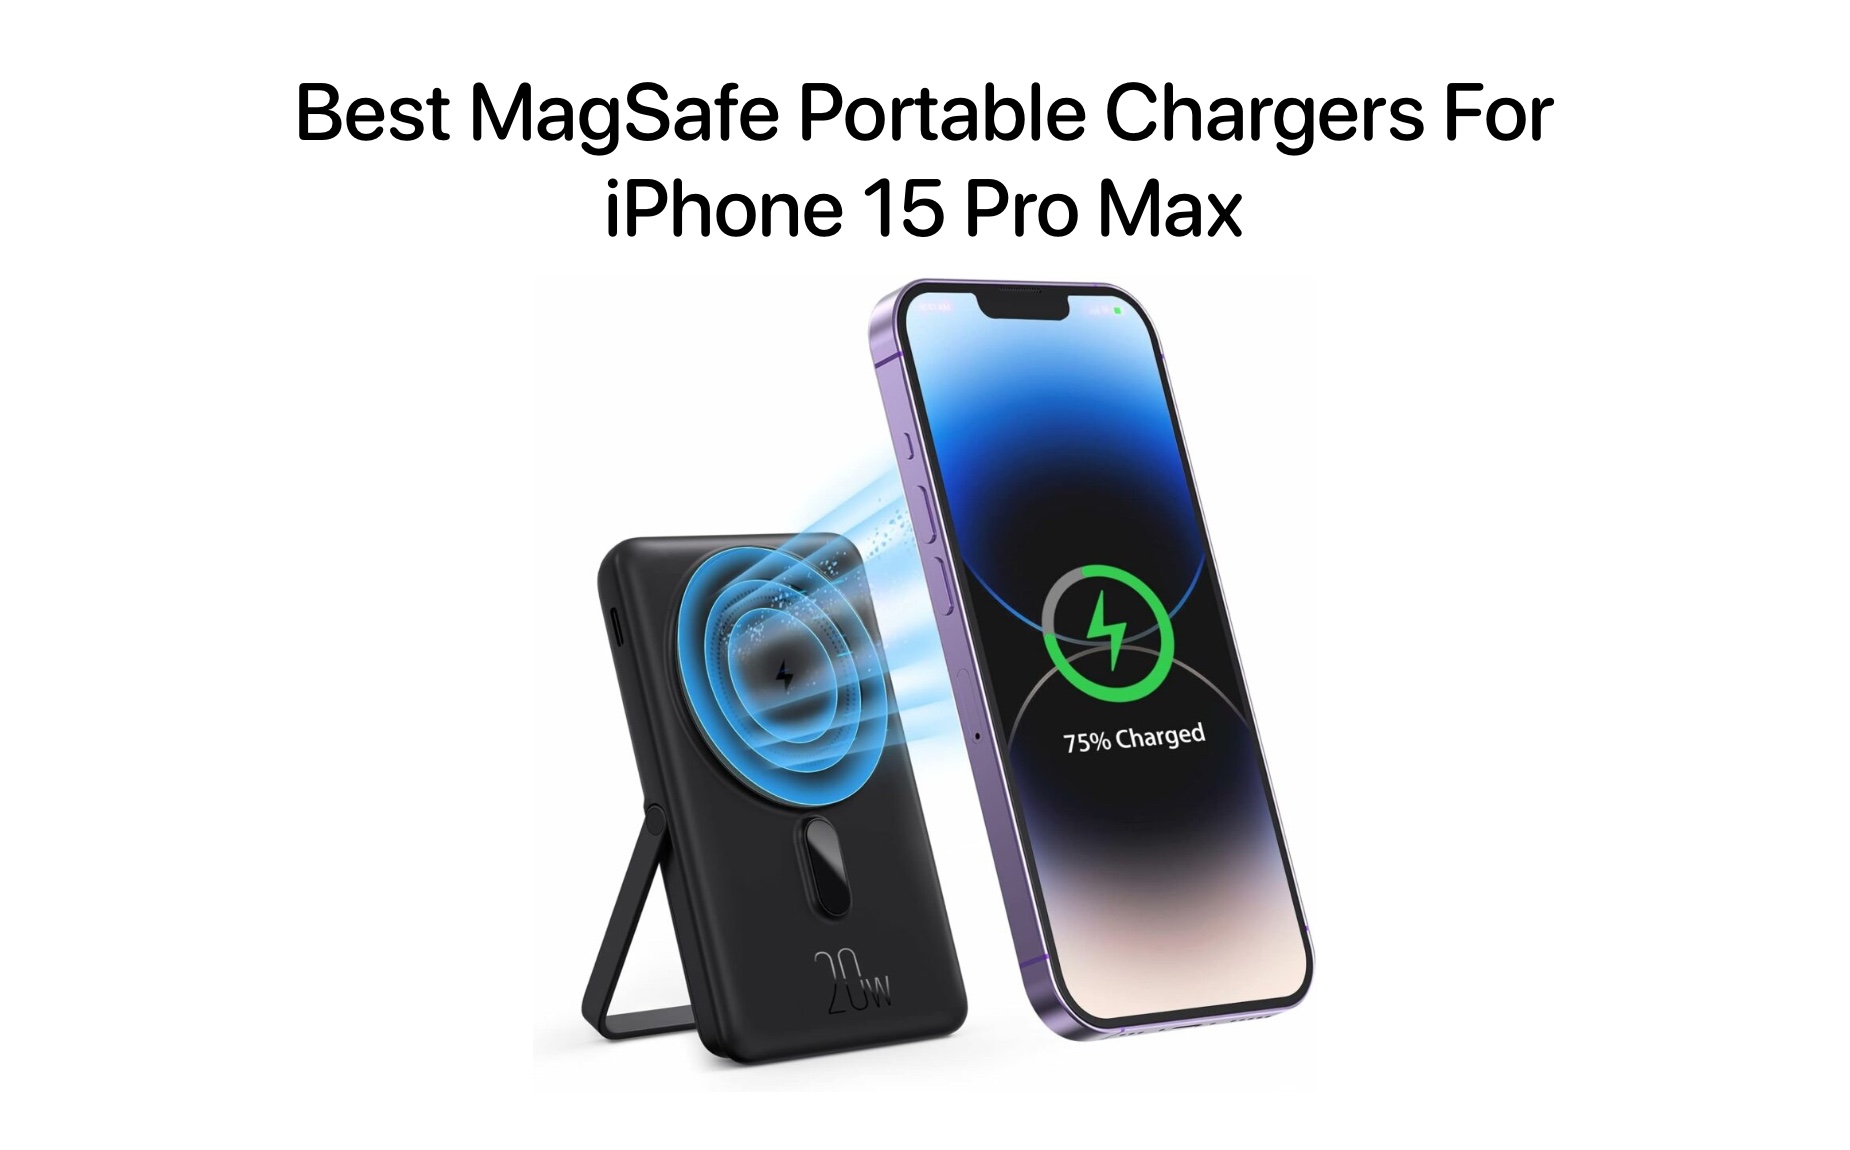 https://ioshacker.com/wp-content/uploads/2023/09/MagSafe-chargers-iPhone-15-Pro-Max.jpg